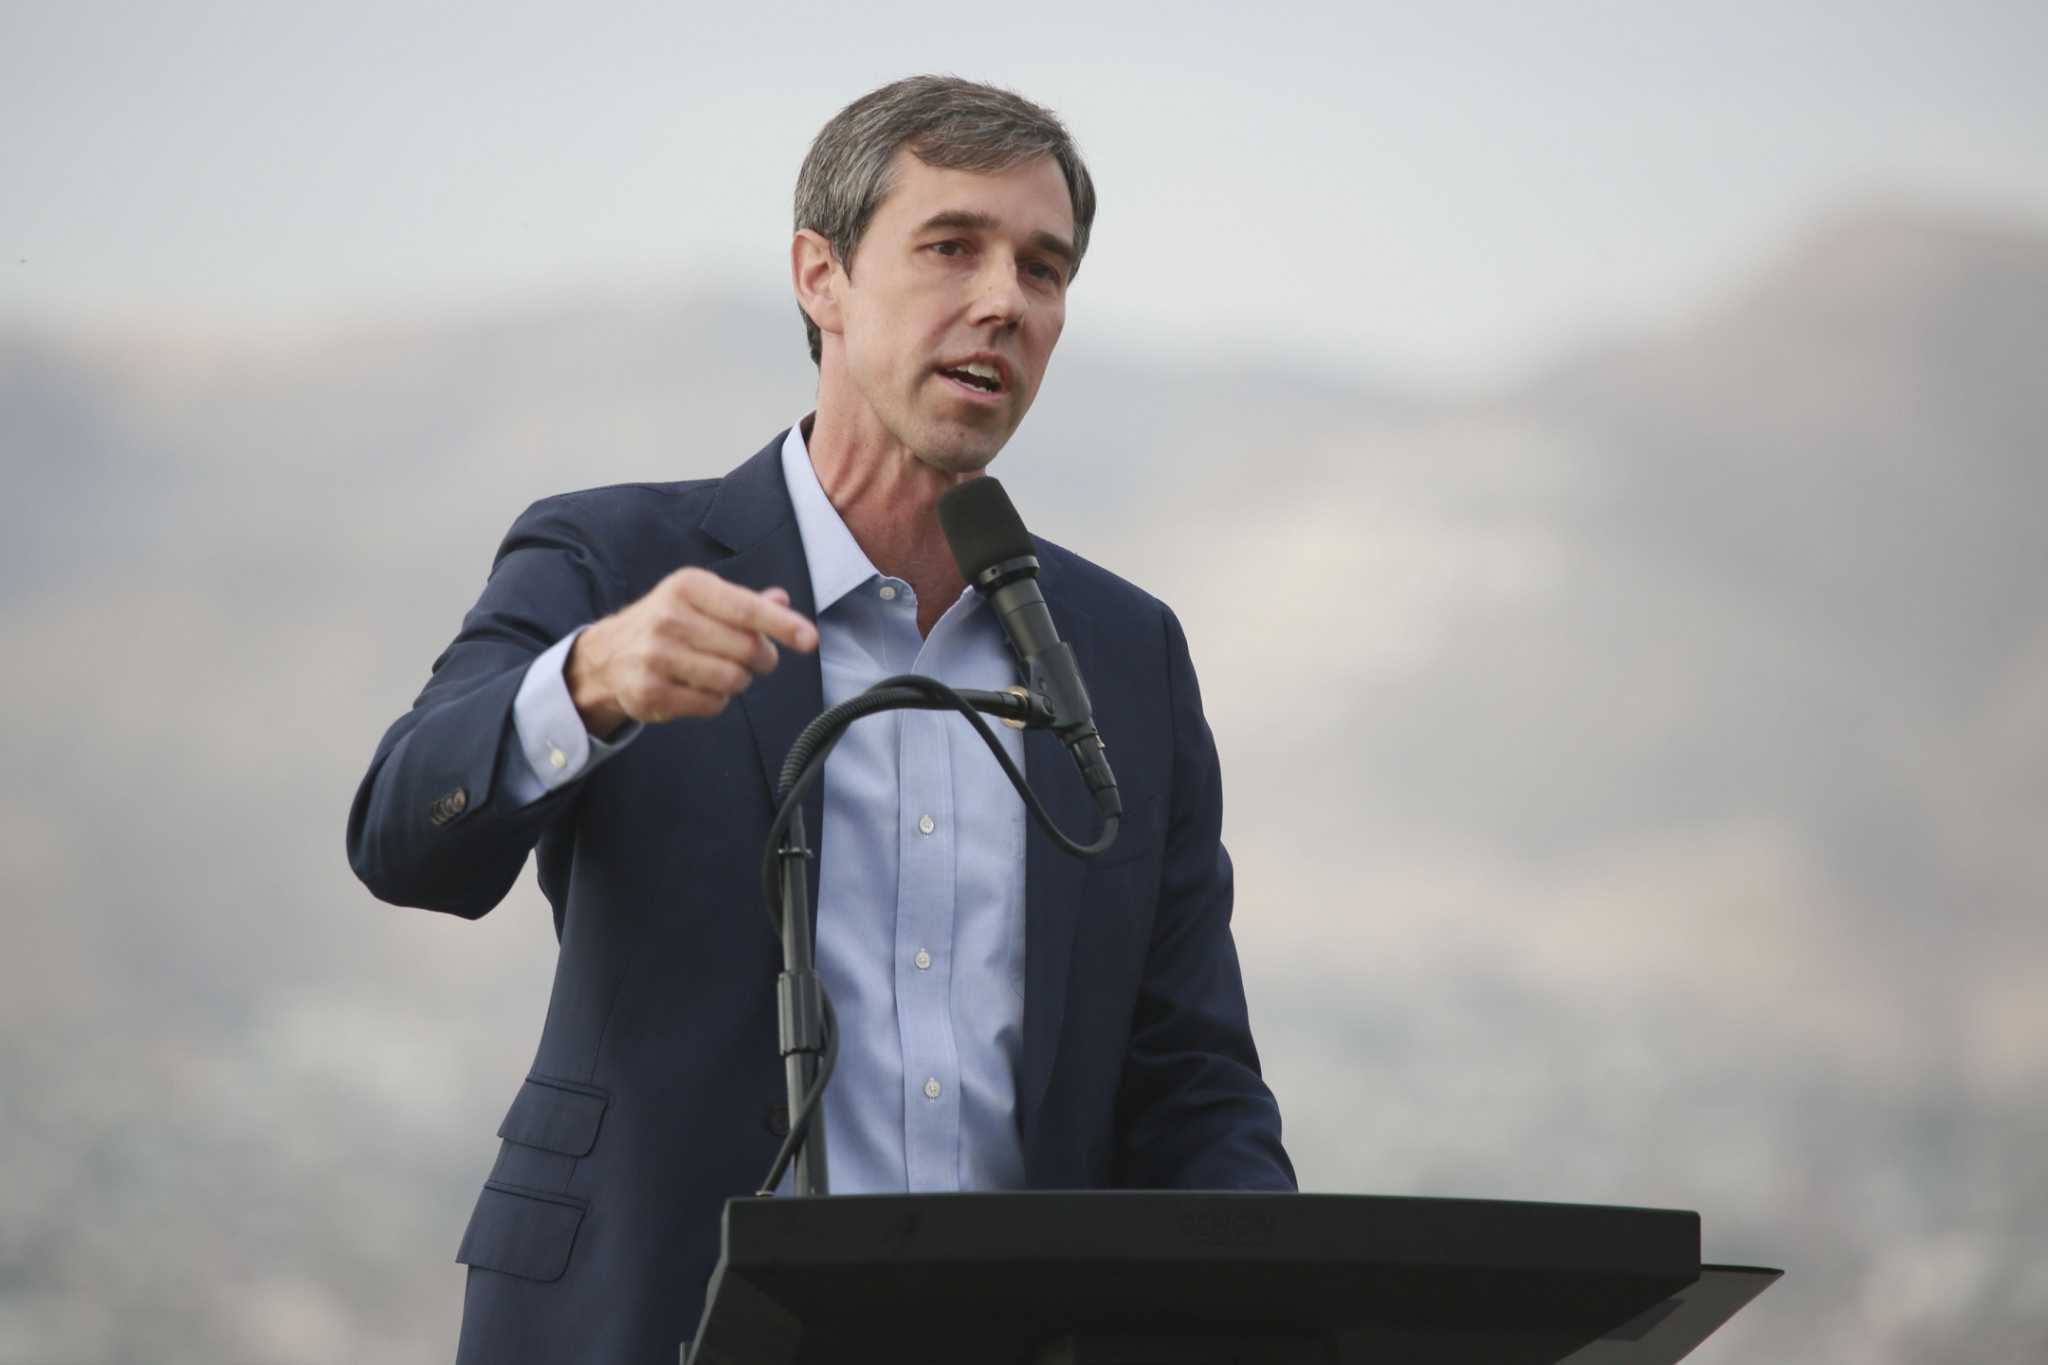 Beto O'Rourke, Abbott on what will 'sell well' as speculatio...